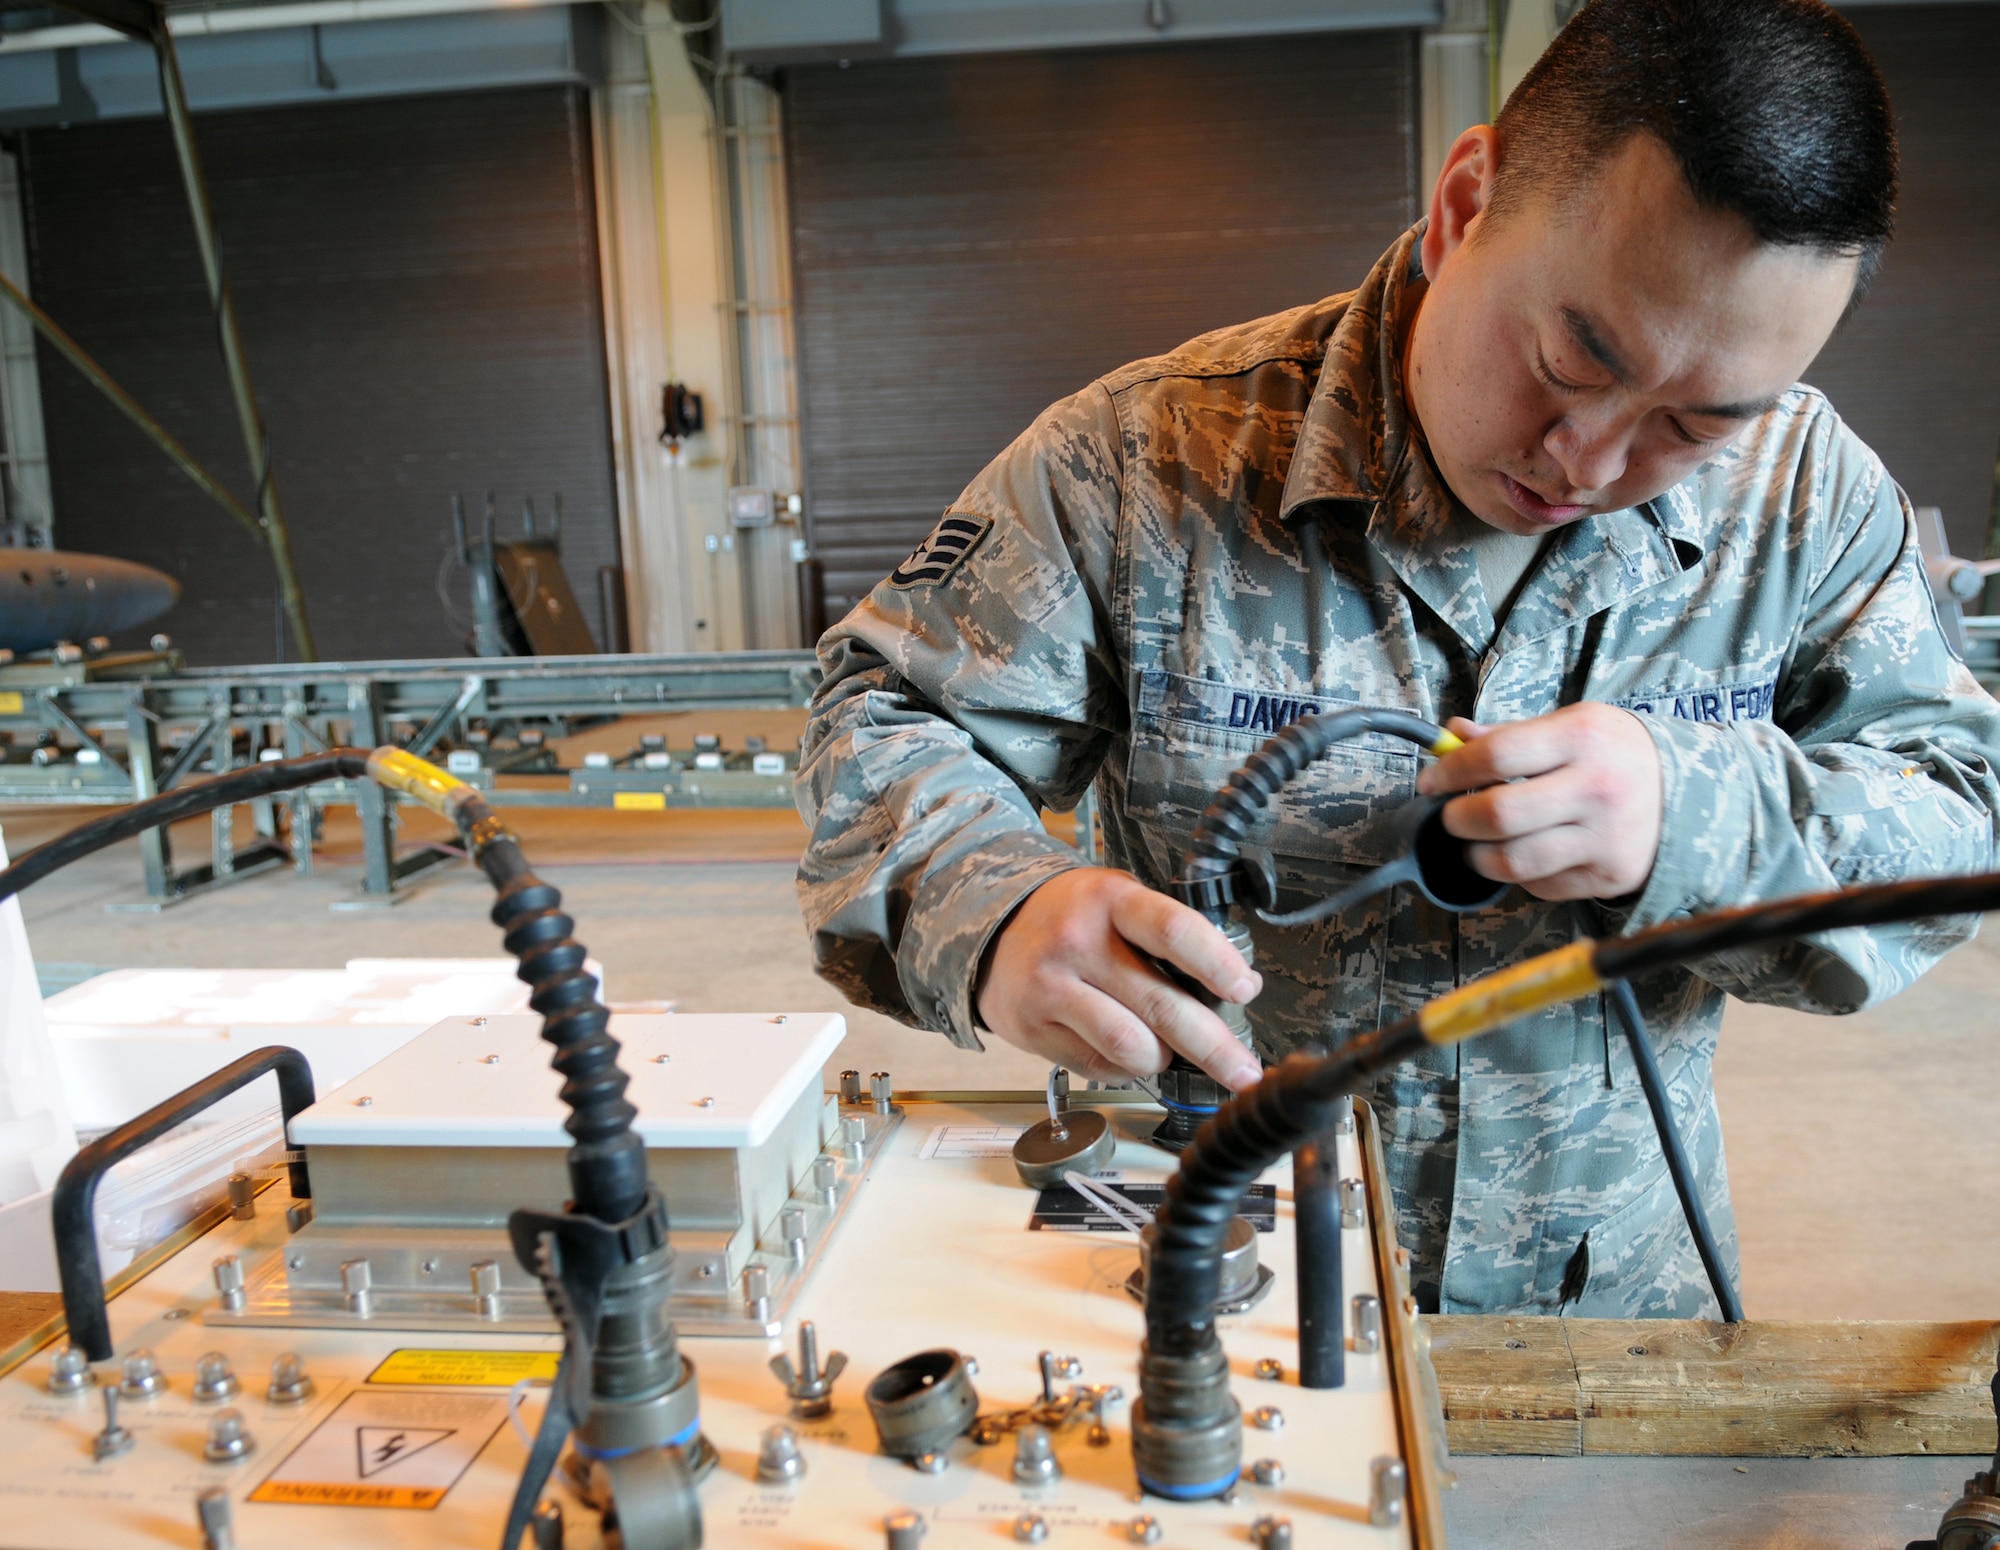 MISAWA AIR BASE, Japan -- Staff Sgt. James Davis, 35th Maintenance Squadron munitions flight crew member, connects cannon plugs on Common Munitions Bit/Reprogramming Equipment June 9, 2009. The CMBRE tests the working components of a joint direct attack munition's guidance system. The guidance system can be tested before or after the fin is attached to the munition. (U.S. Air Force photo by Staff Sgt. Rachel Martinez)